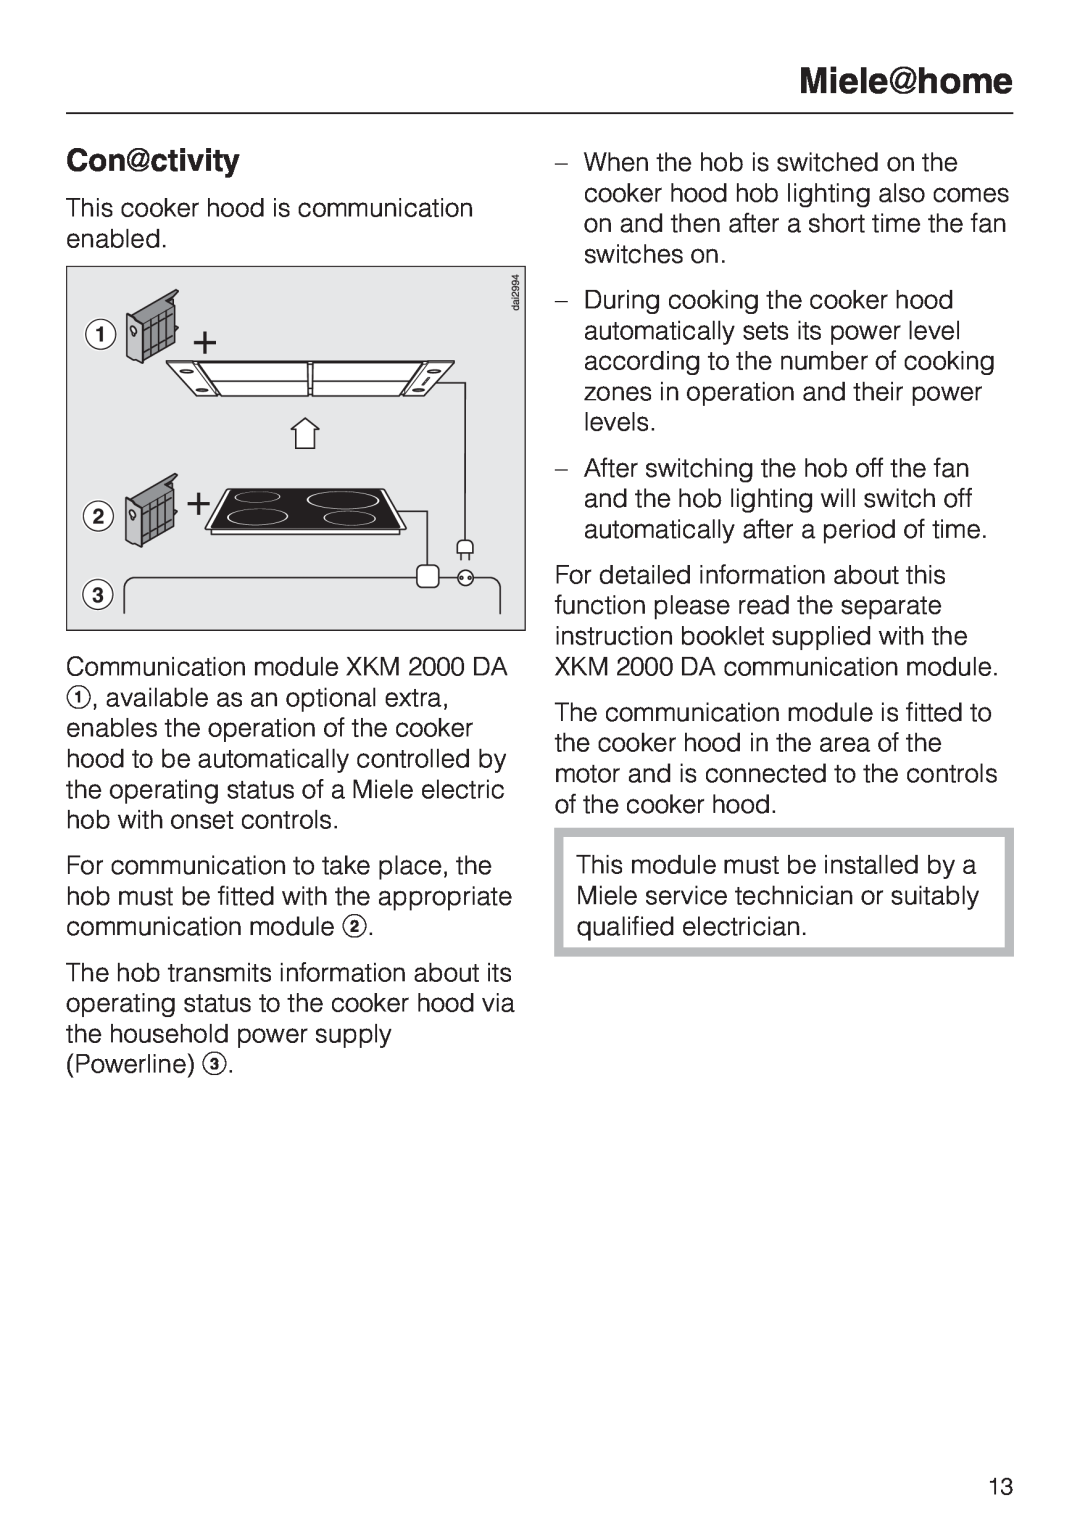 Miele DA2900EXT installation instructions Mielehome, Conctivity 